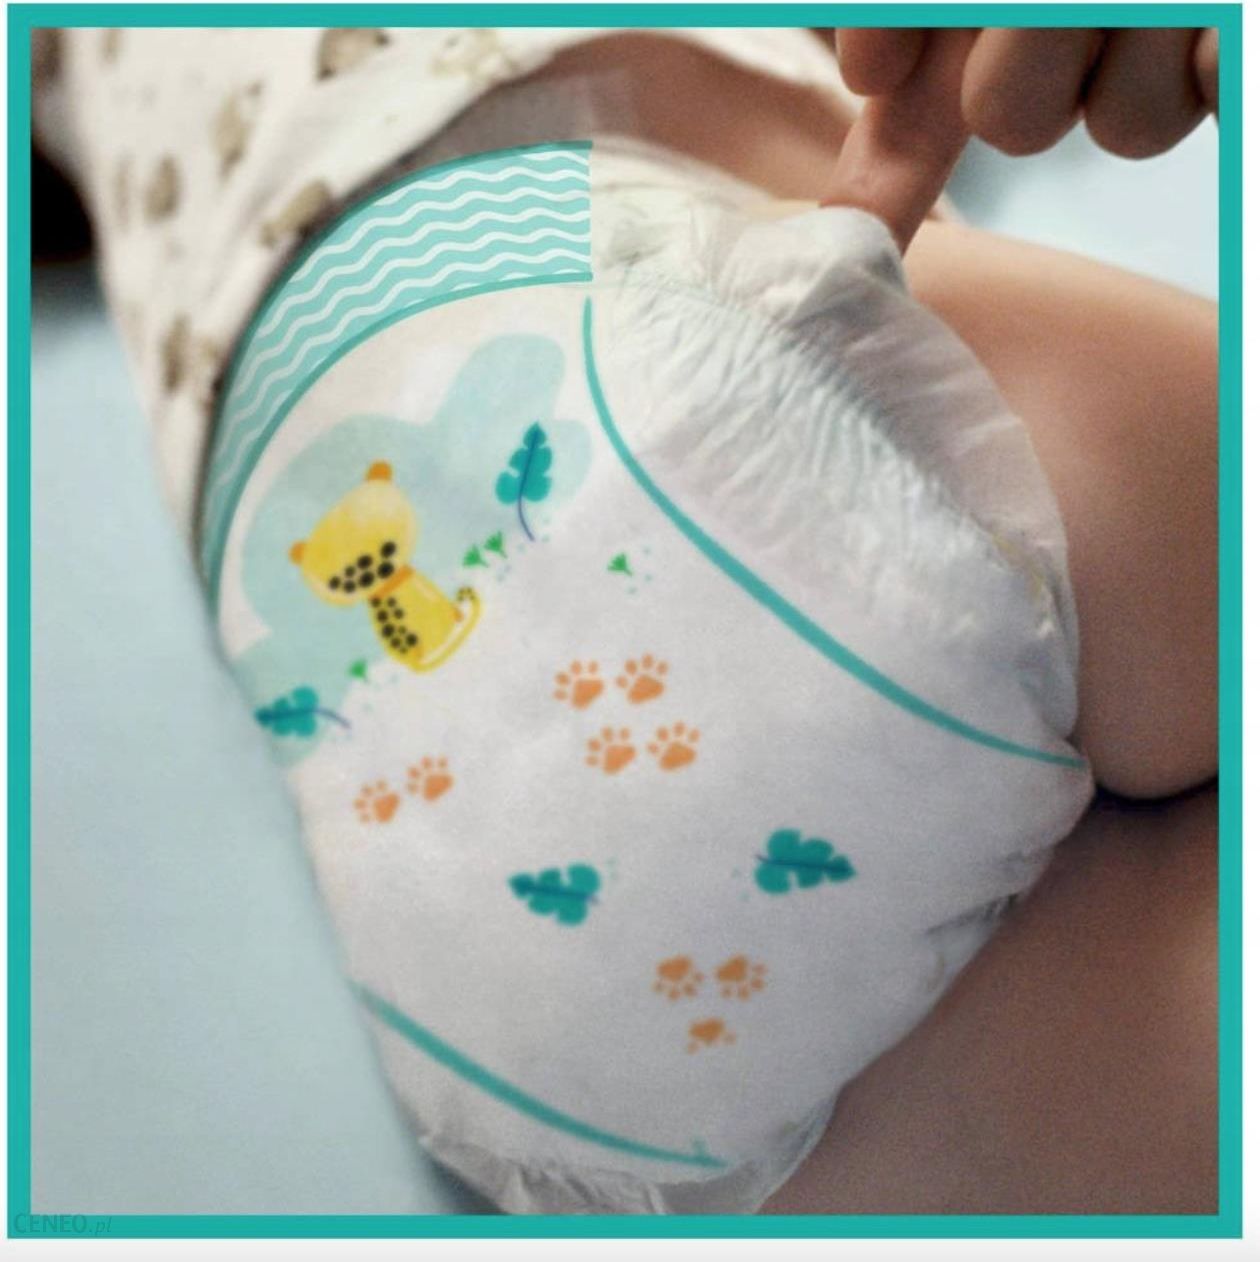 pampers premium care promoceny